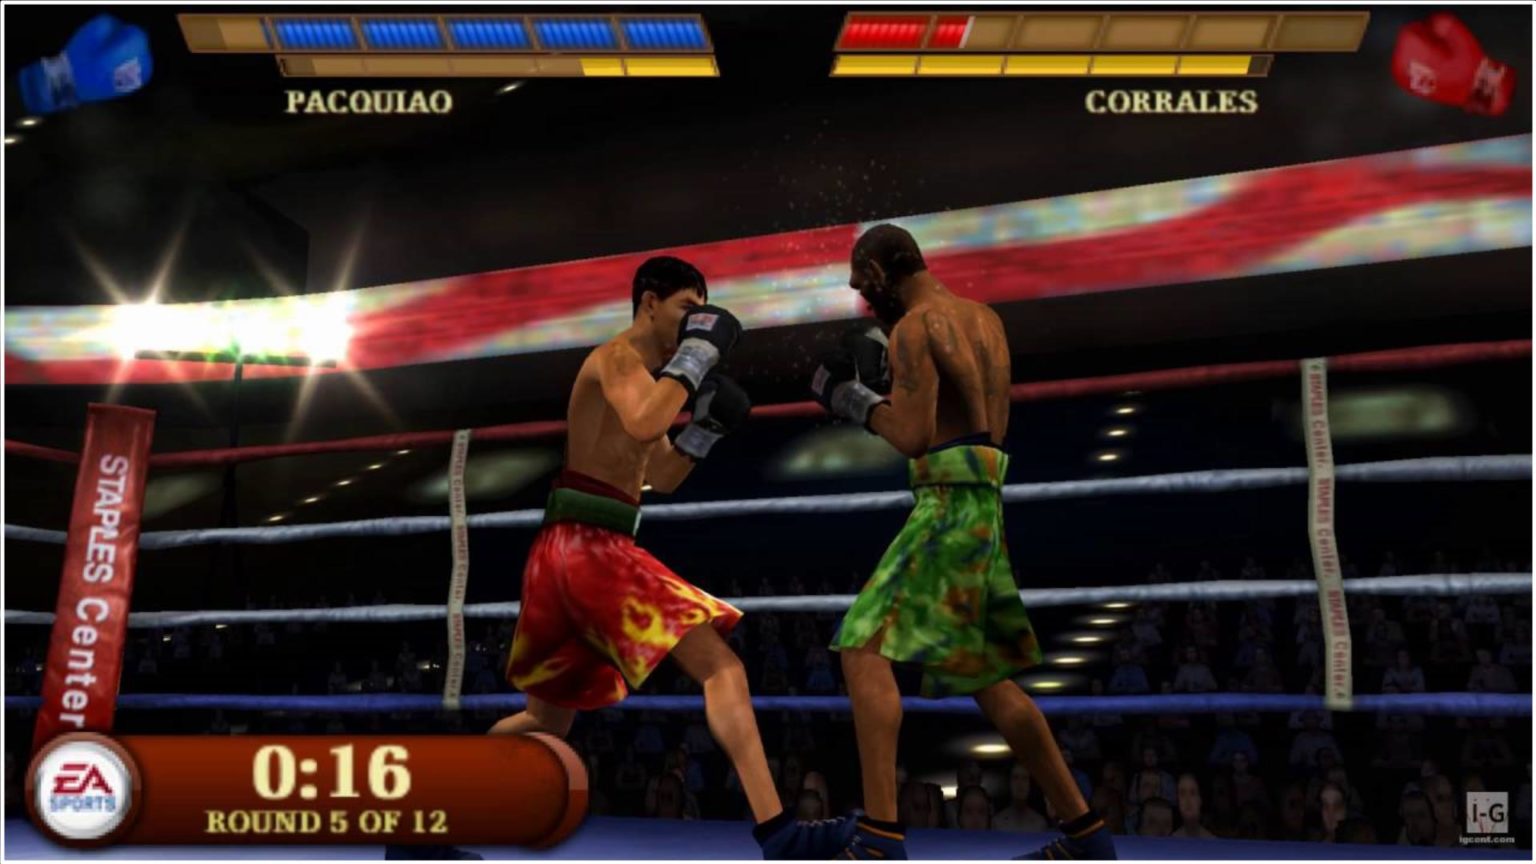 Fight Night Round 3 PSP ISO File Highly Compressed (159mb) With PPSSPP Emulator on Android 1